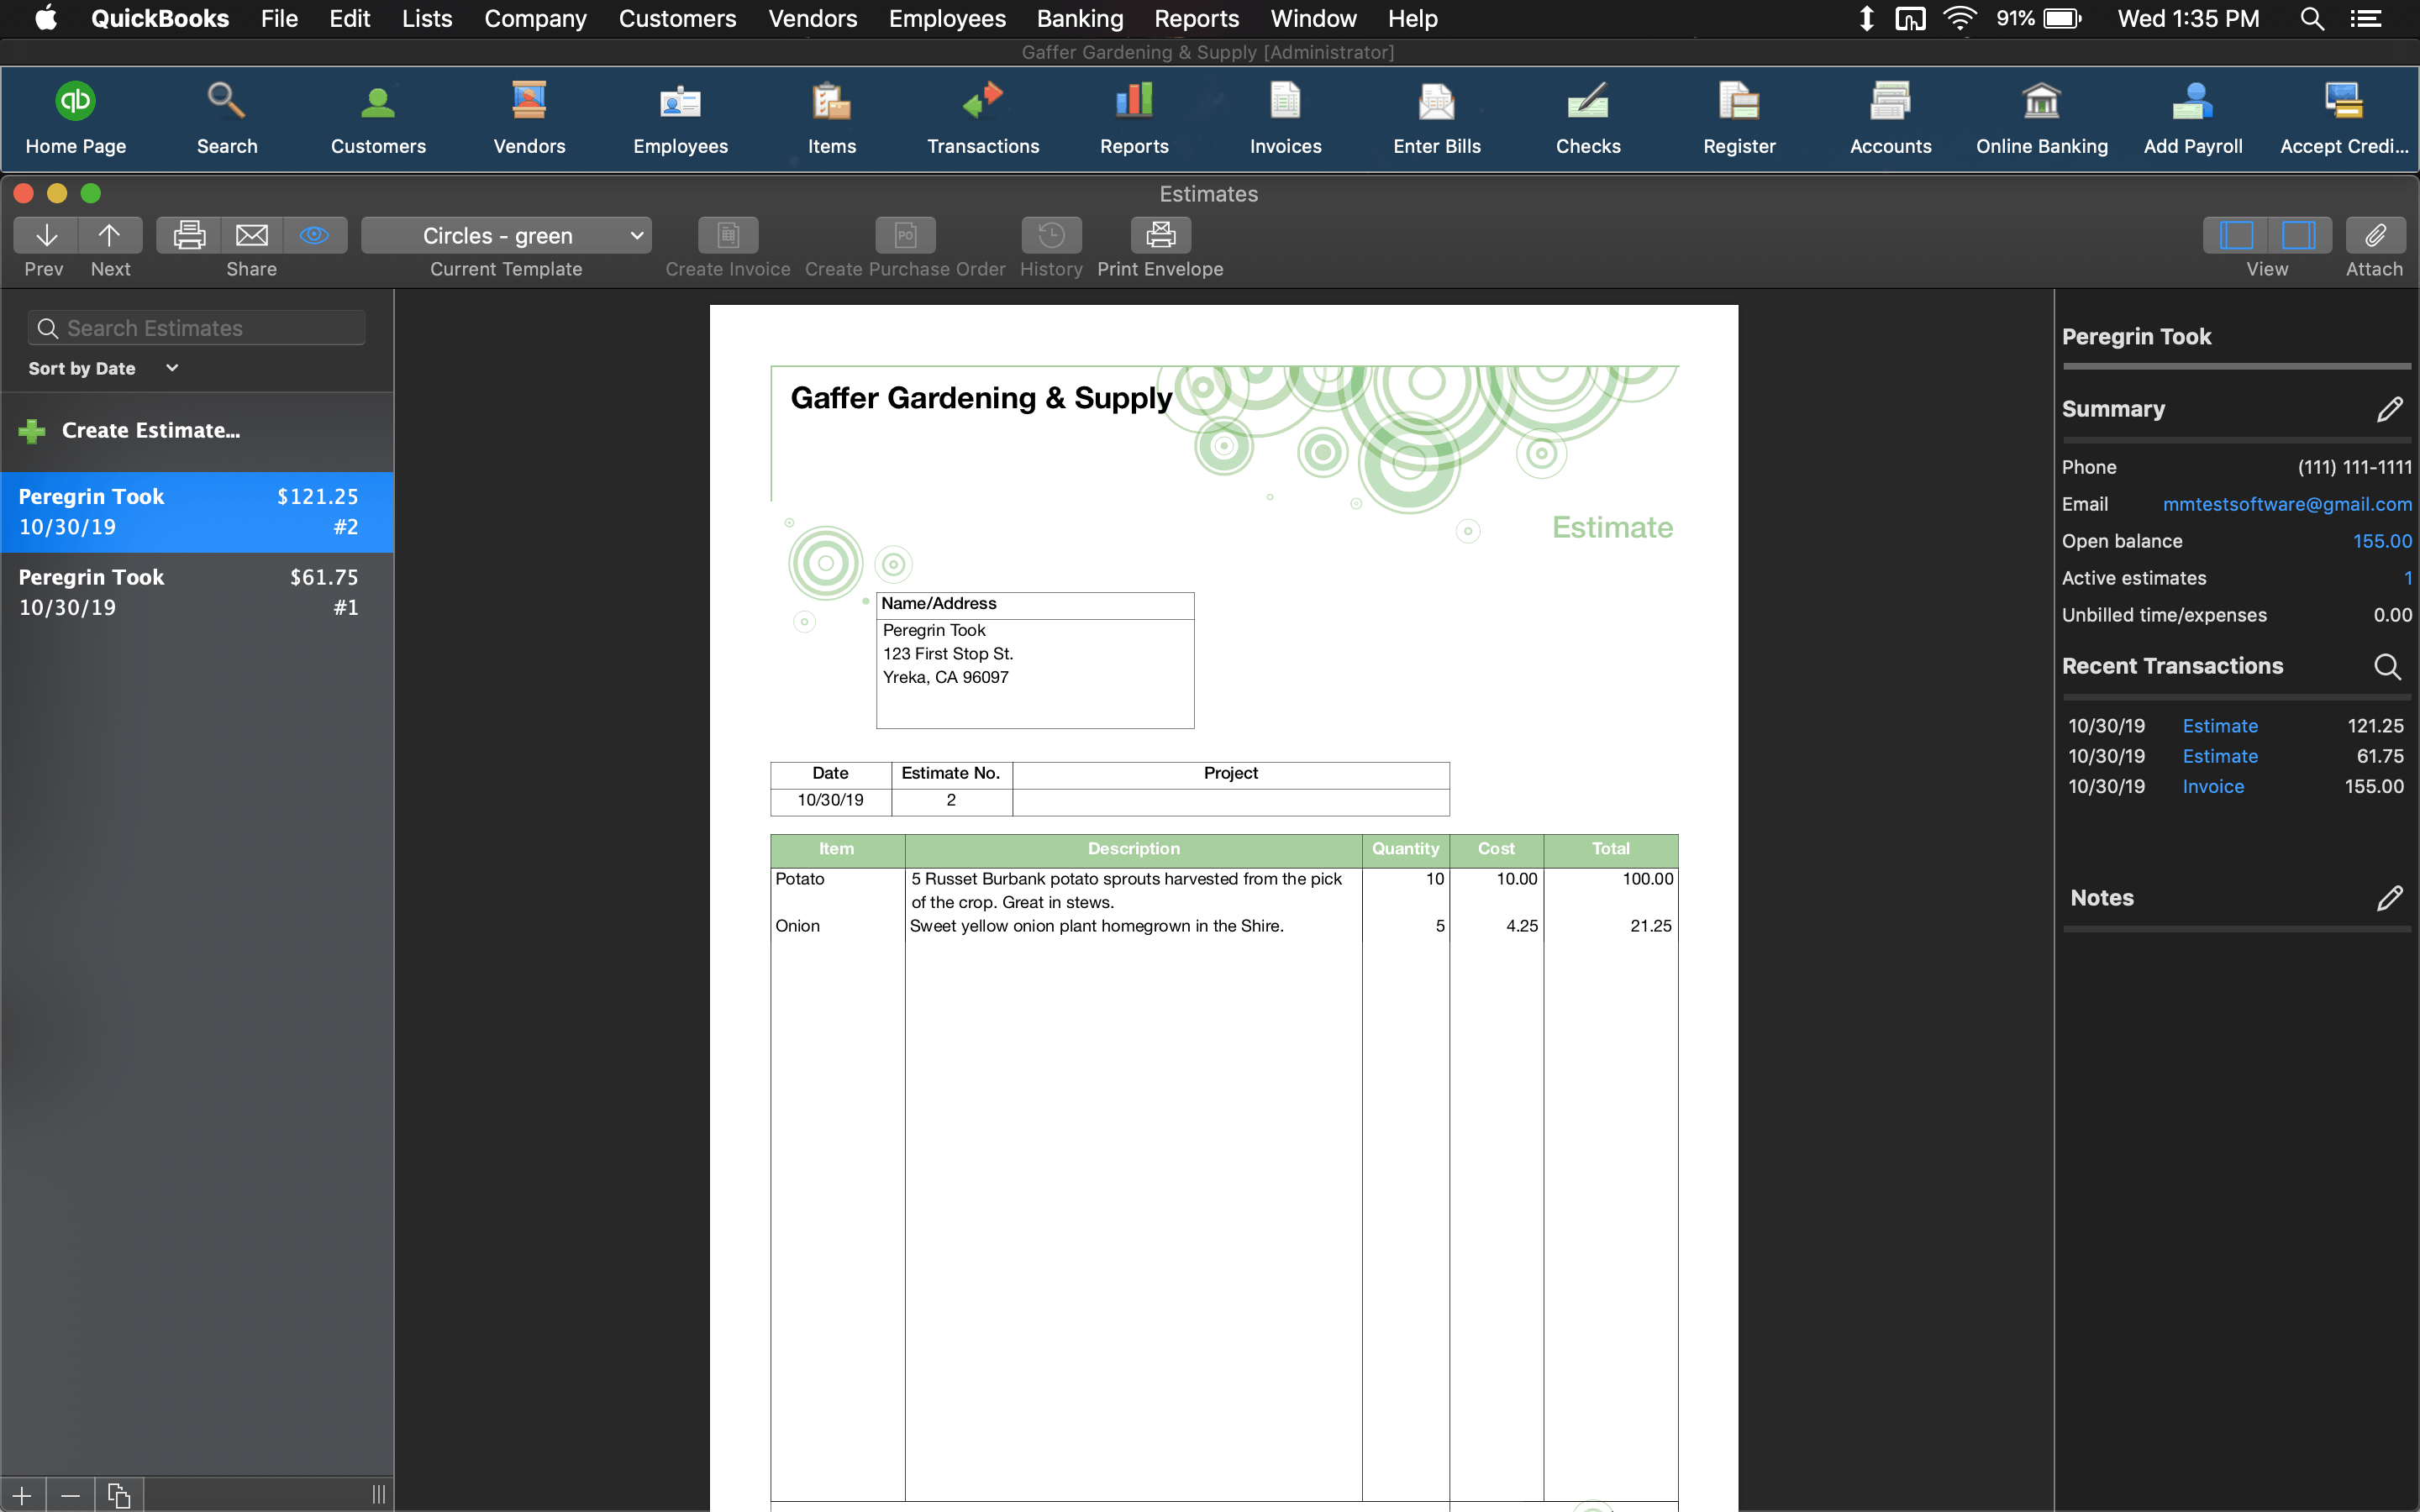 i bought quickbooks for mac 2013 and never used it, can i still